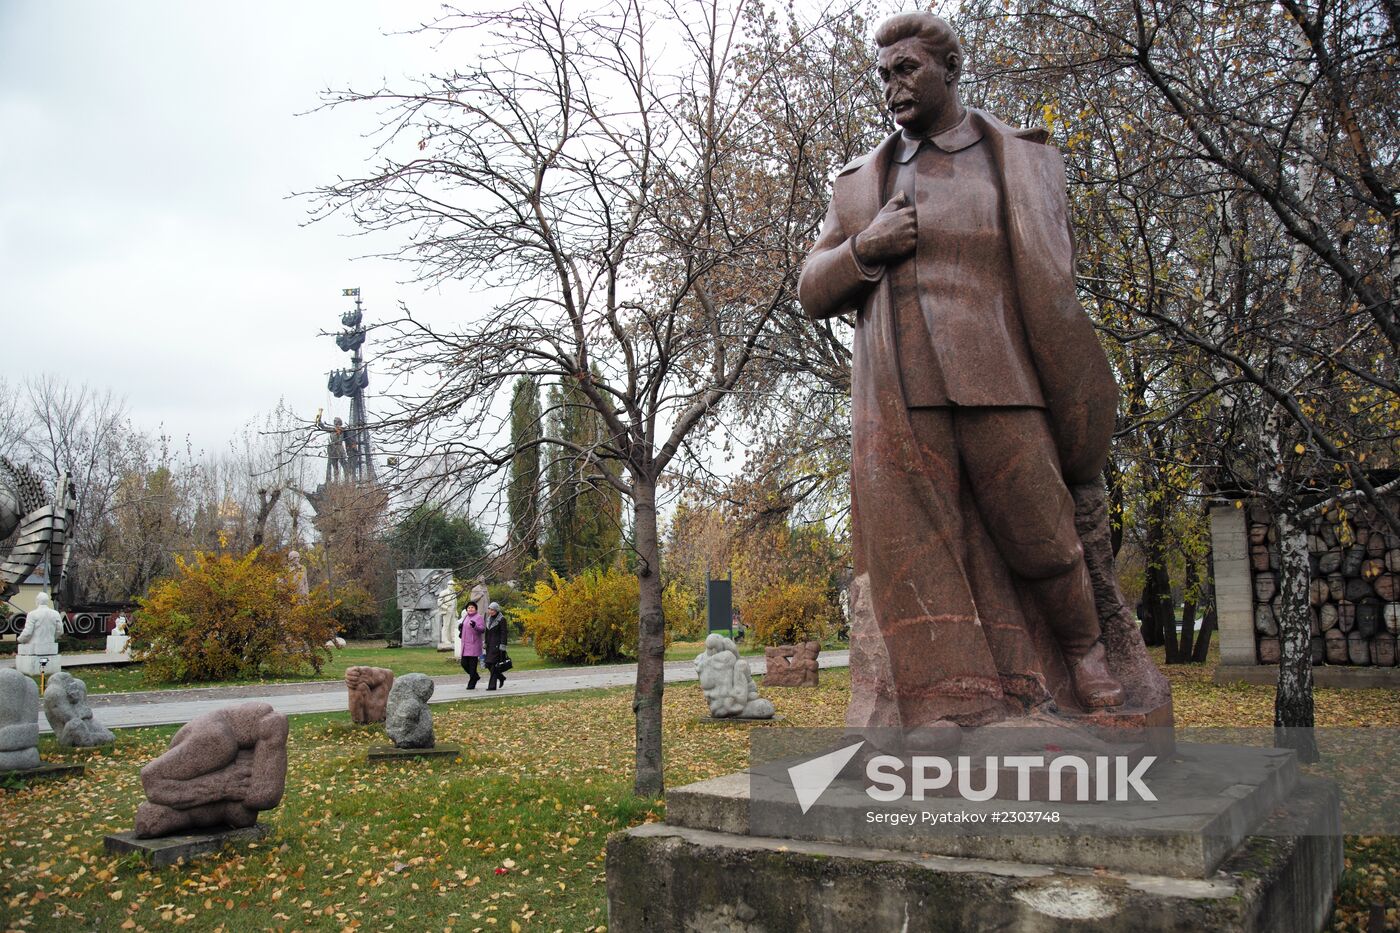 Monuments to Soviet leaders in Muzeon Arts Park